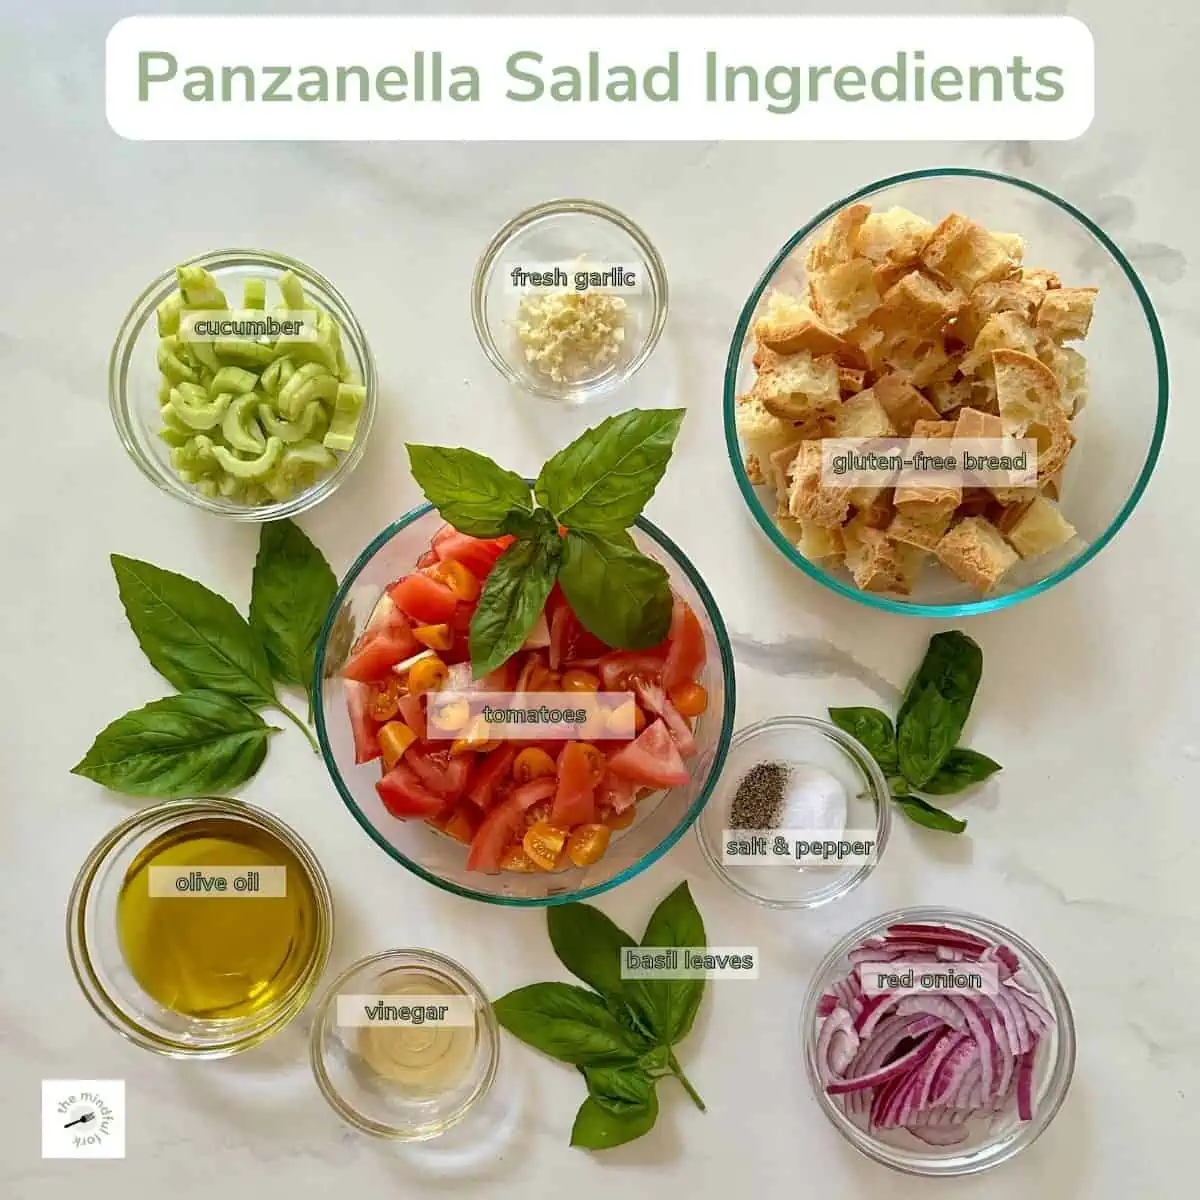 Ingredients to make panzanella salad on the table.